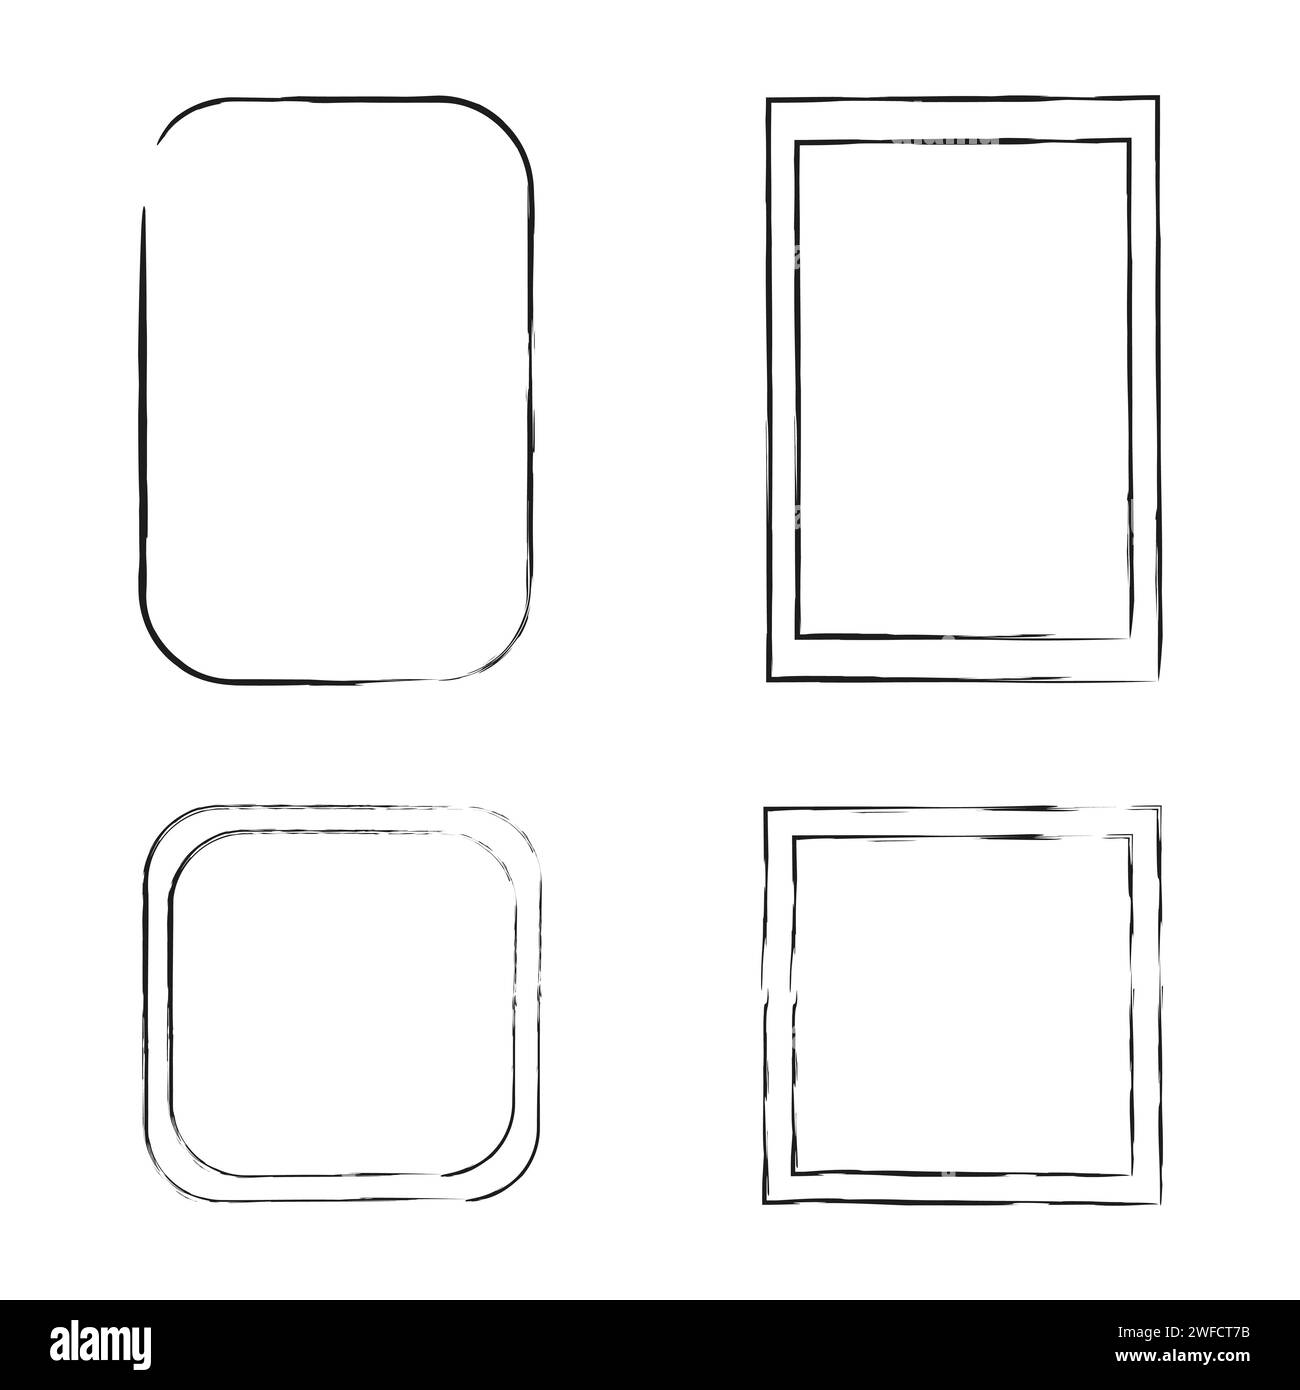 Different grunge frame shapes. Abstract grunge black background, texture. stock image. EPS 10. Stock Vector